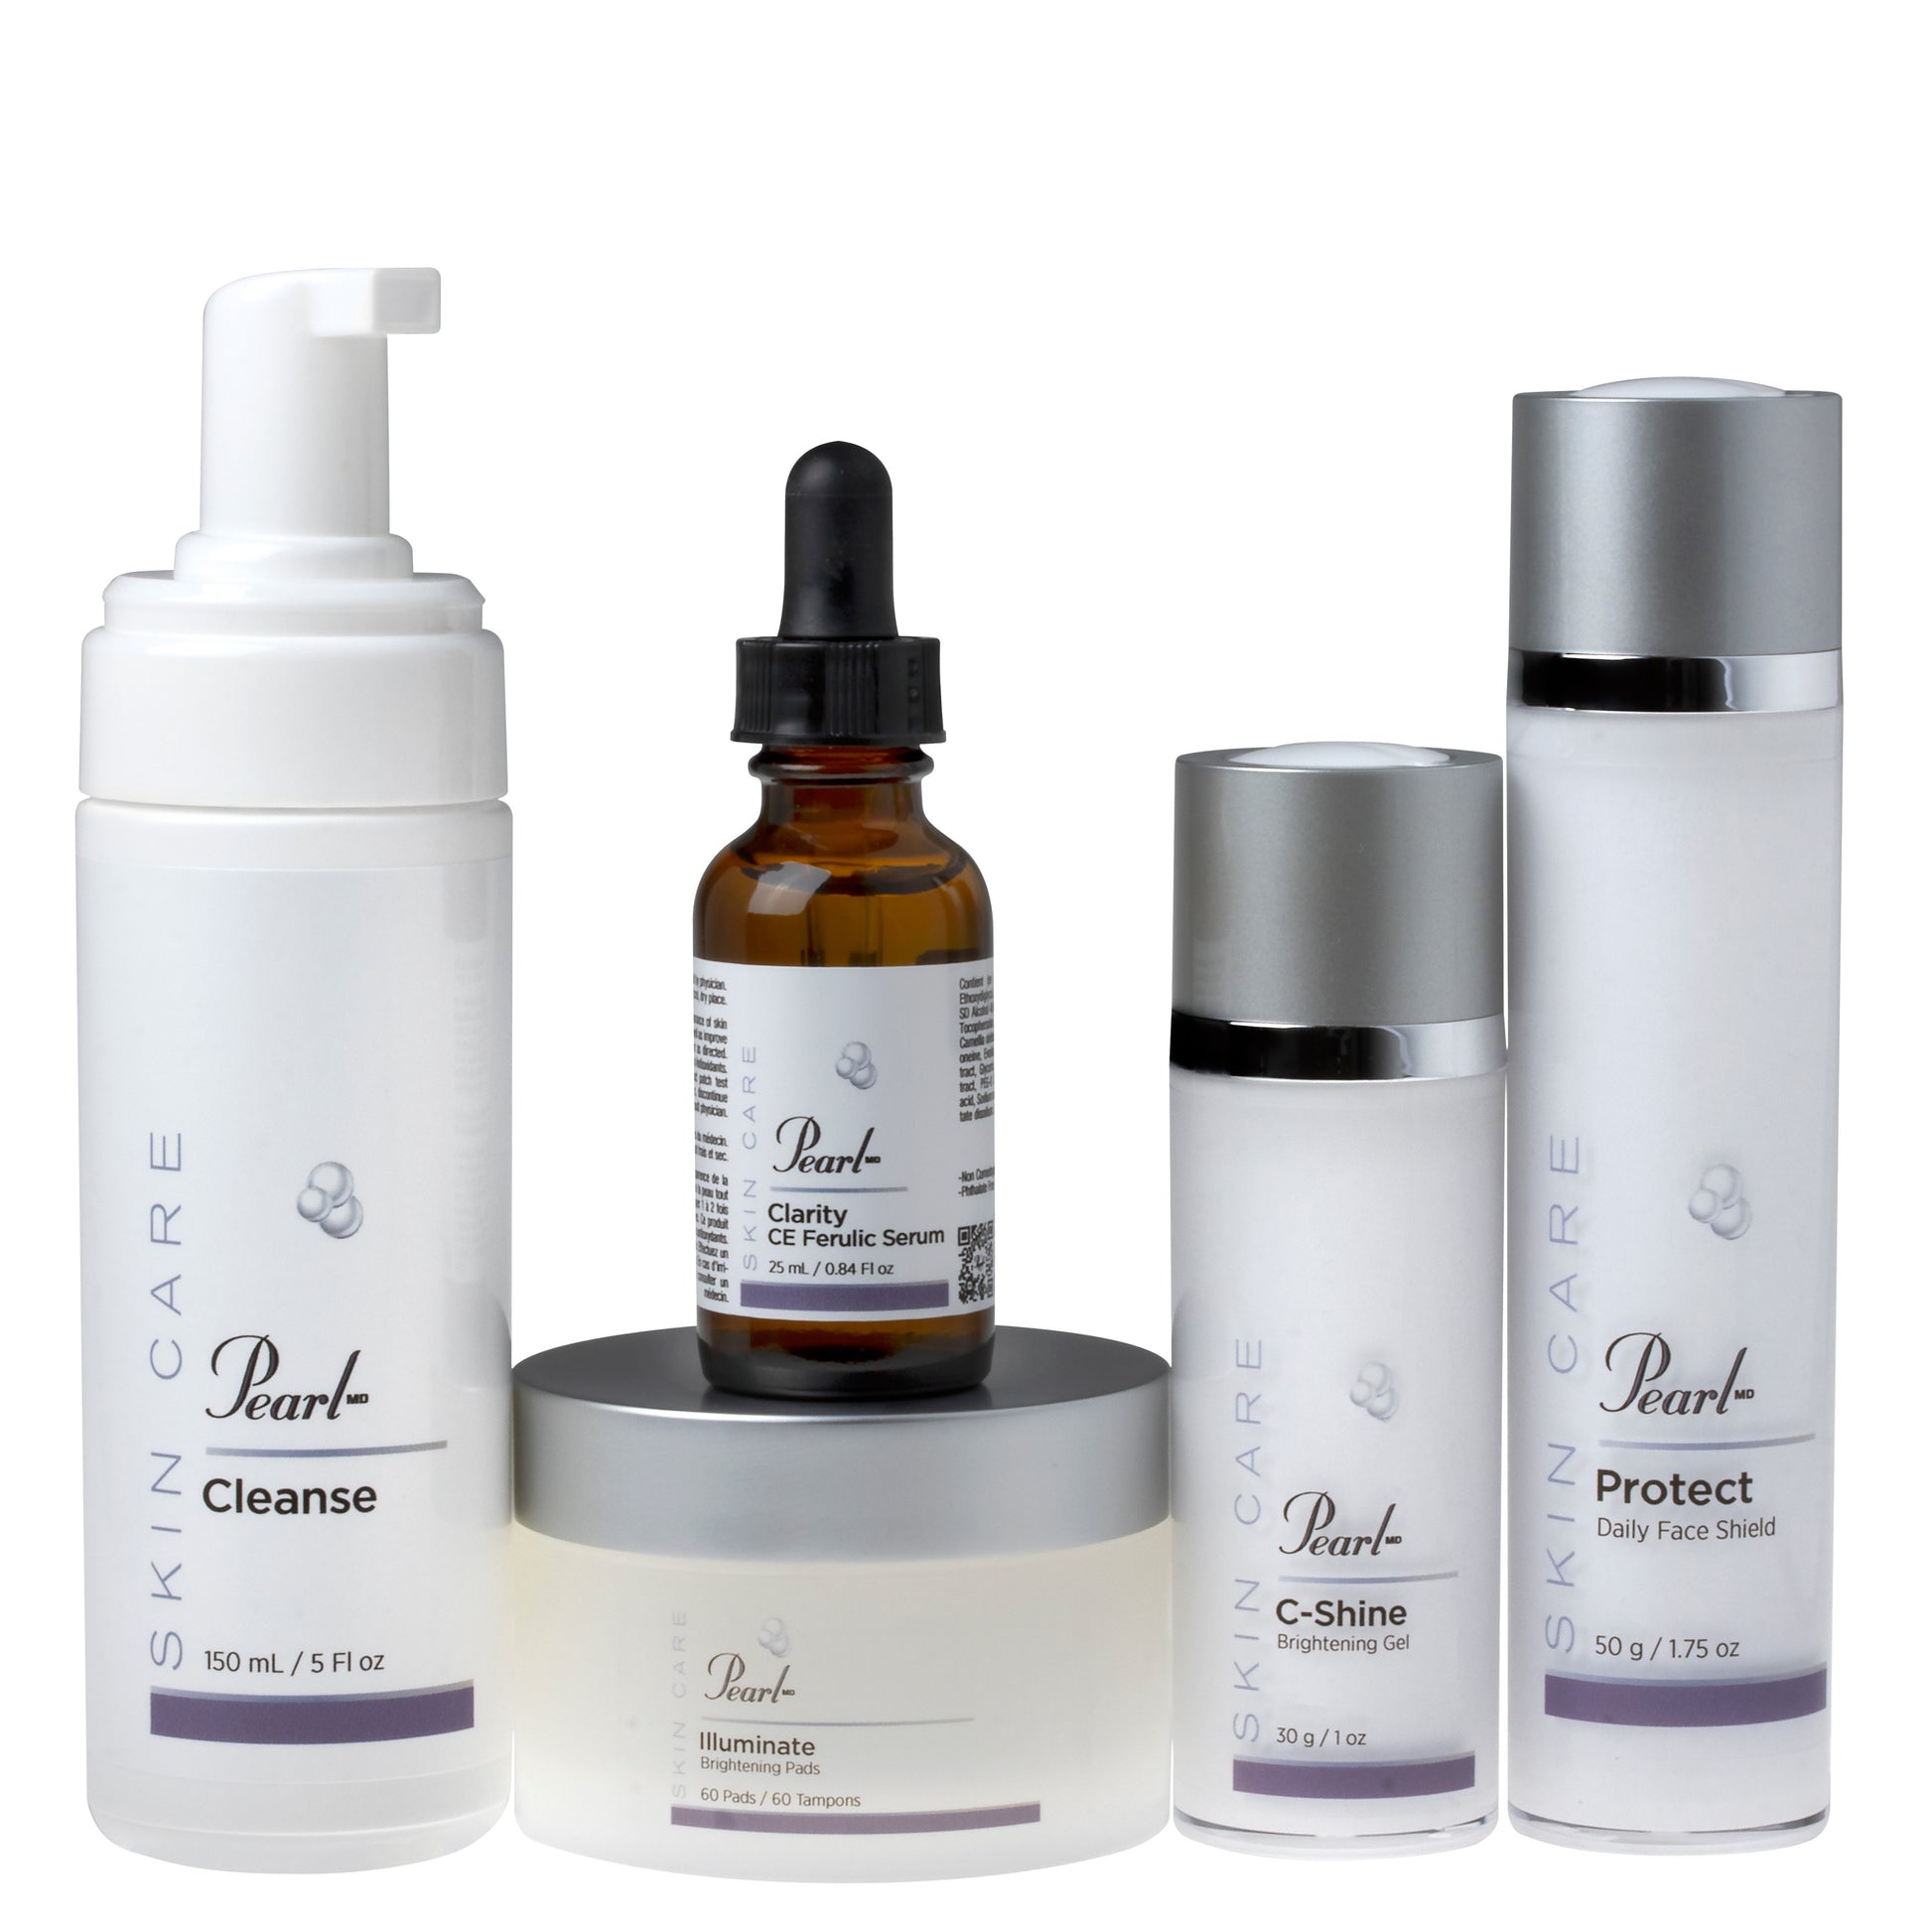 PearlMD Skincare Bright Skin Kit brightens and refreshes the appearance of uneven skin tone and improve texture